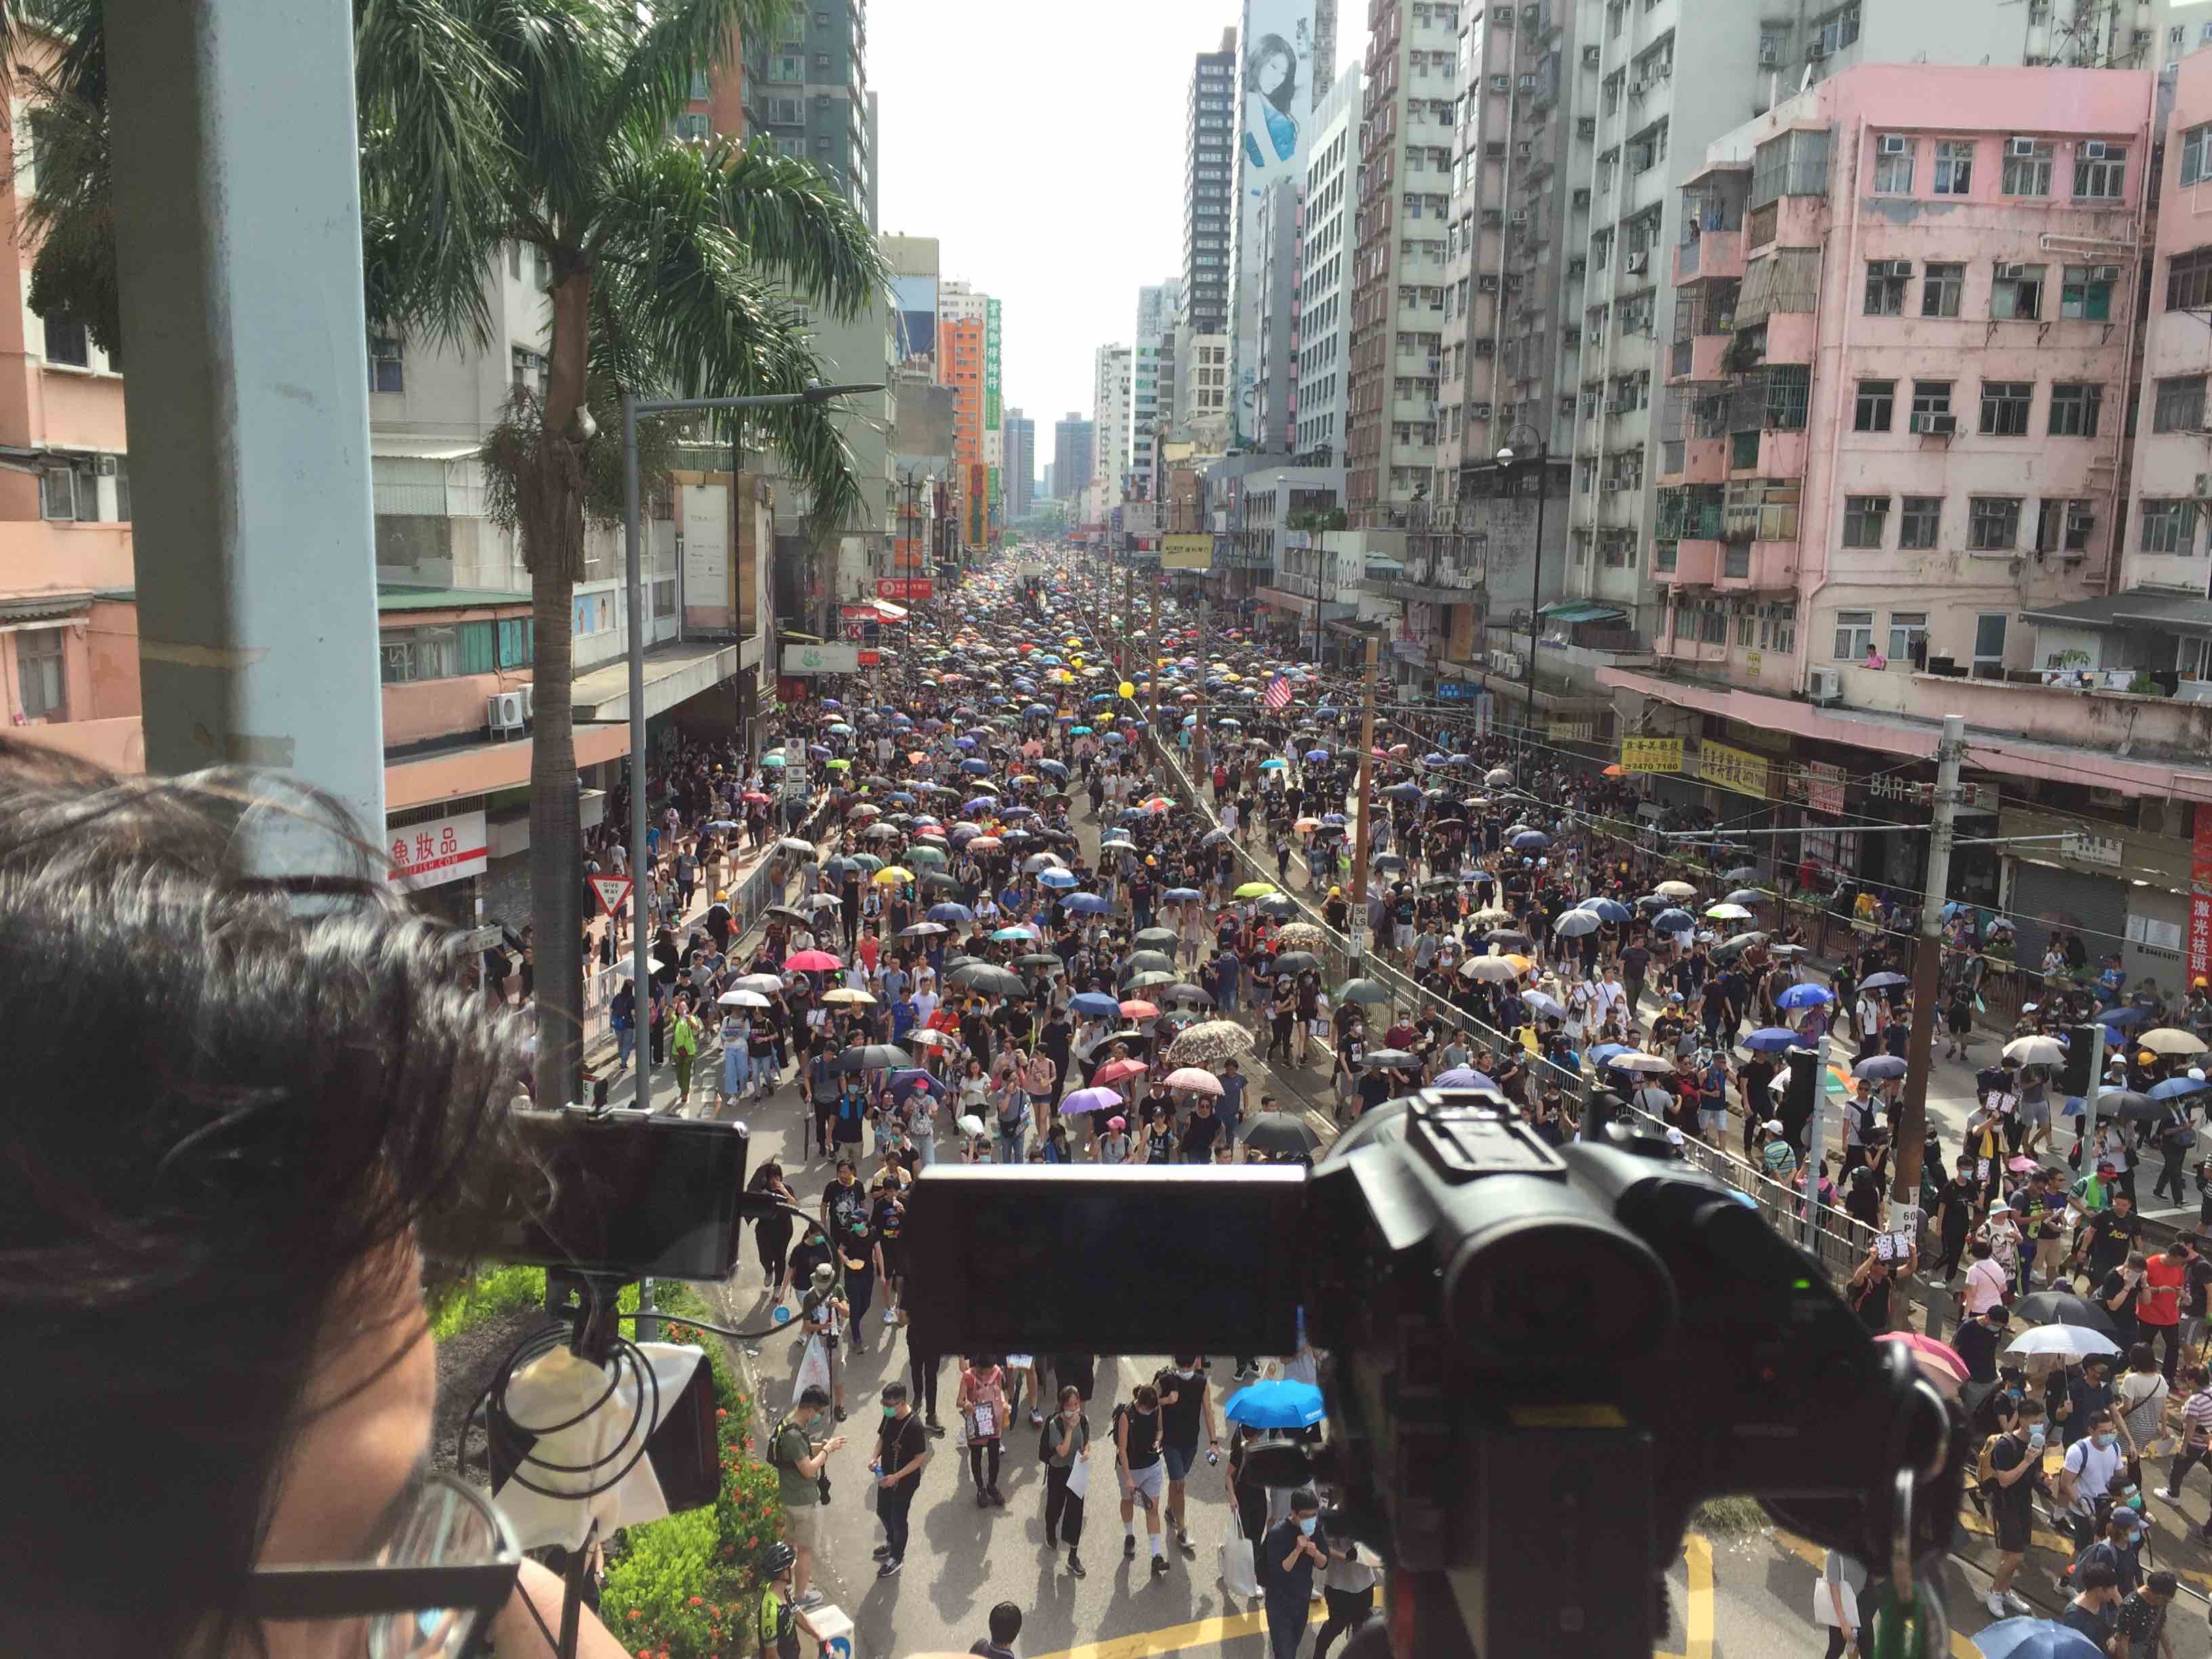 Thousands of protesters crowd Castle Peak Road during an unsanctioned protest in Yuen Long today. Photo by Stuart White.